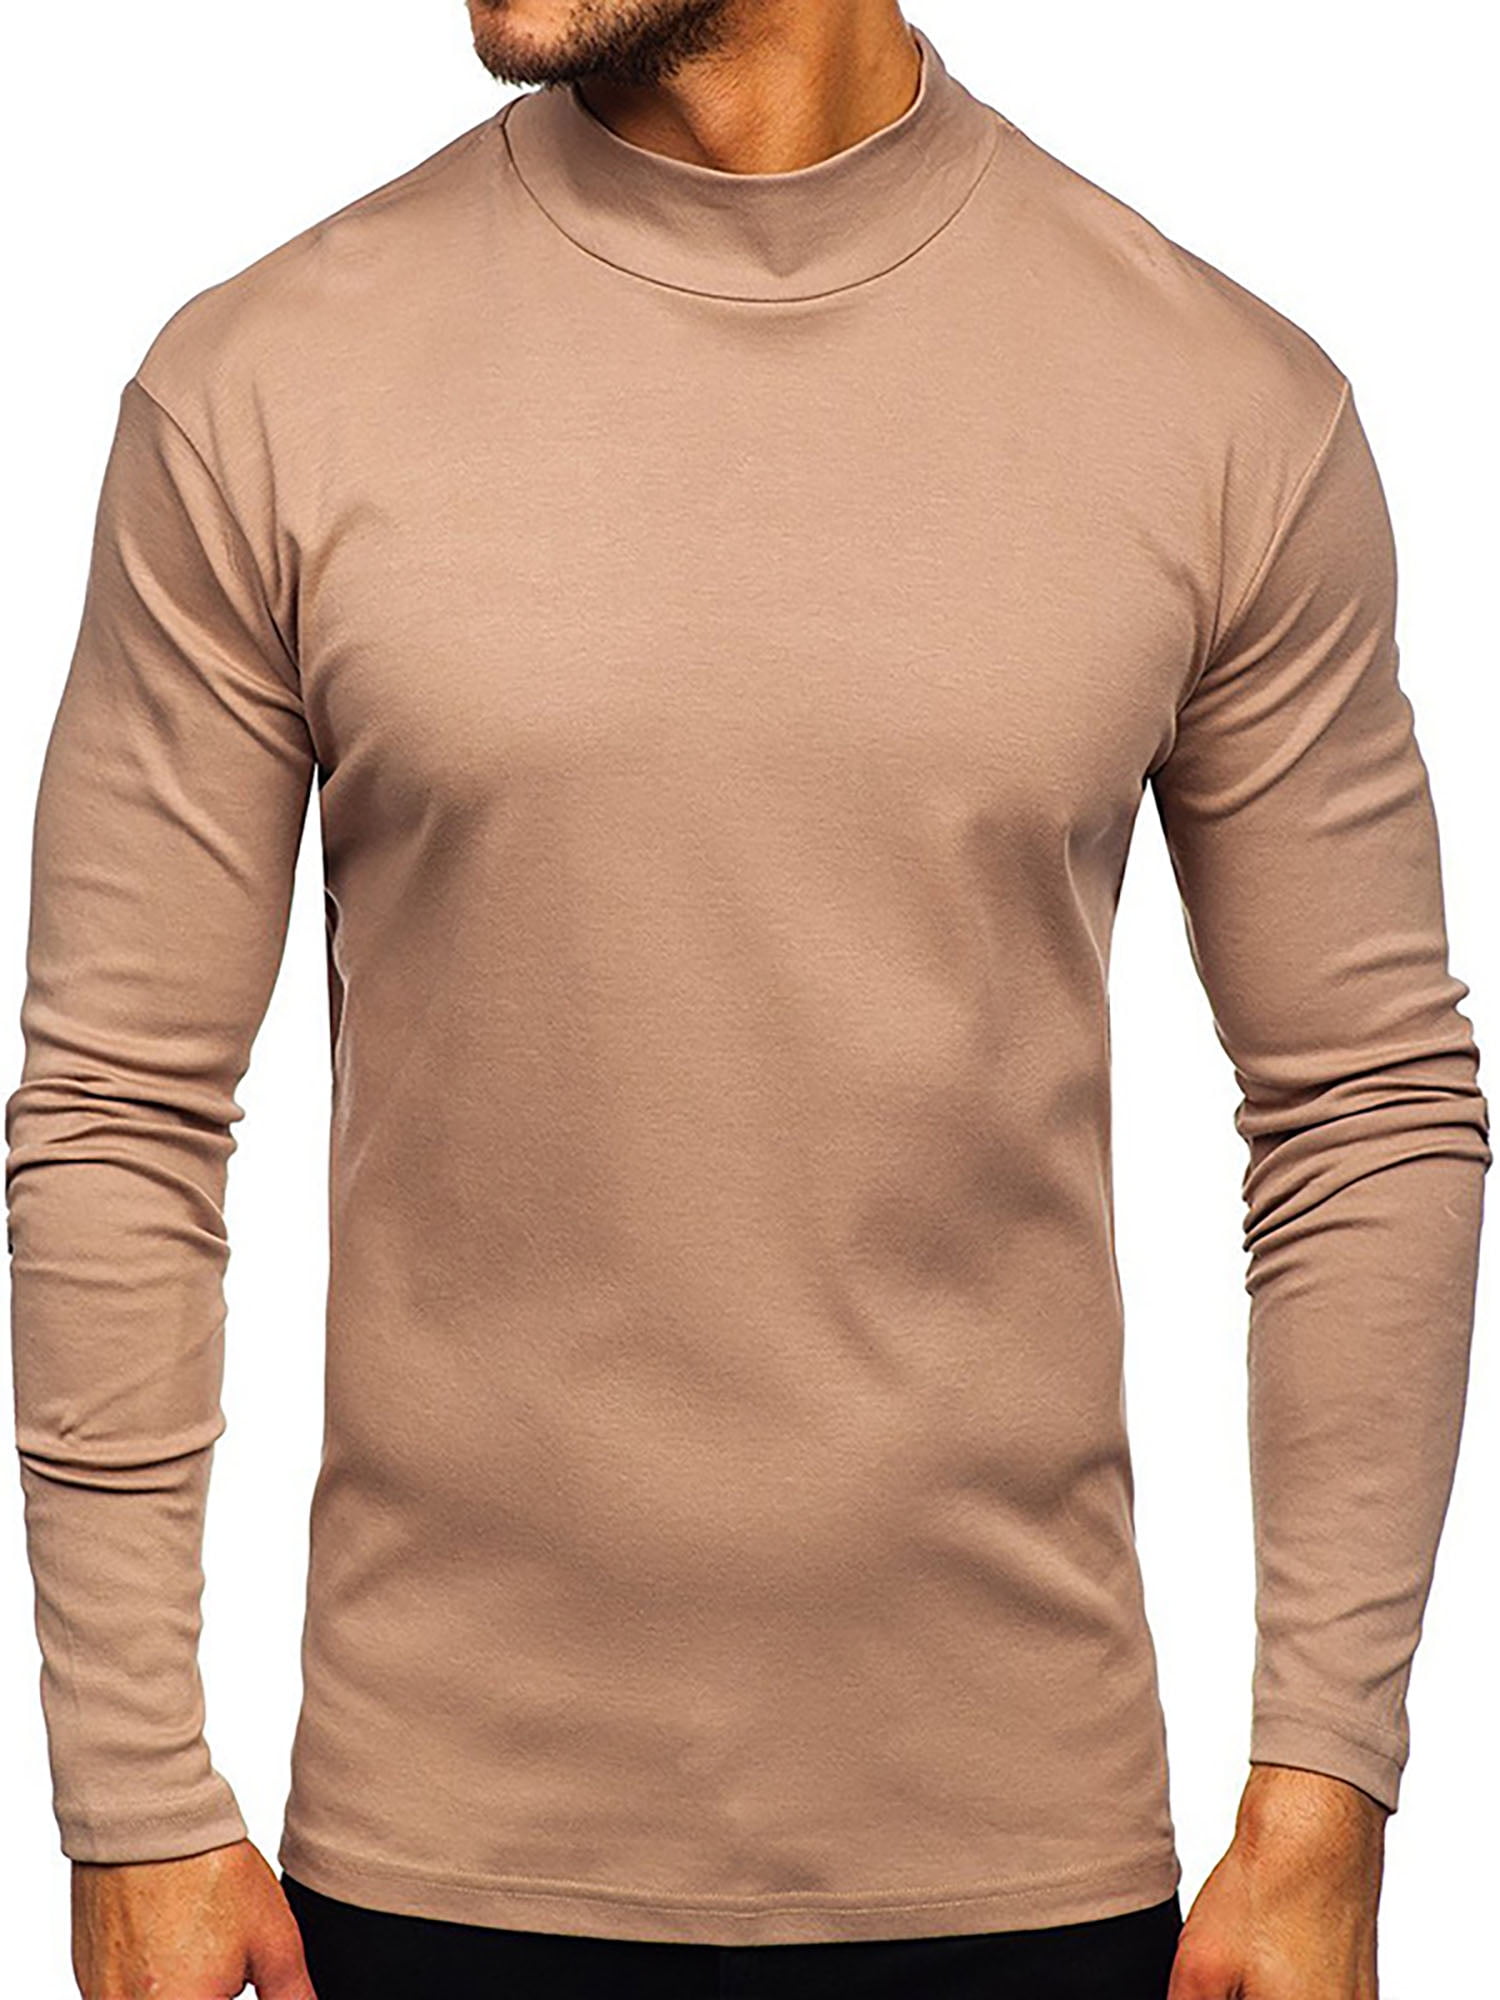 Generic Mens Mens Slim Linen Cotton Base Solid Color Pullover Turtle Neck Sweater Tee